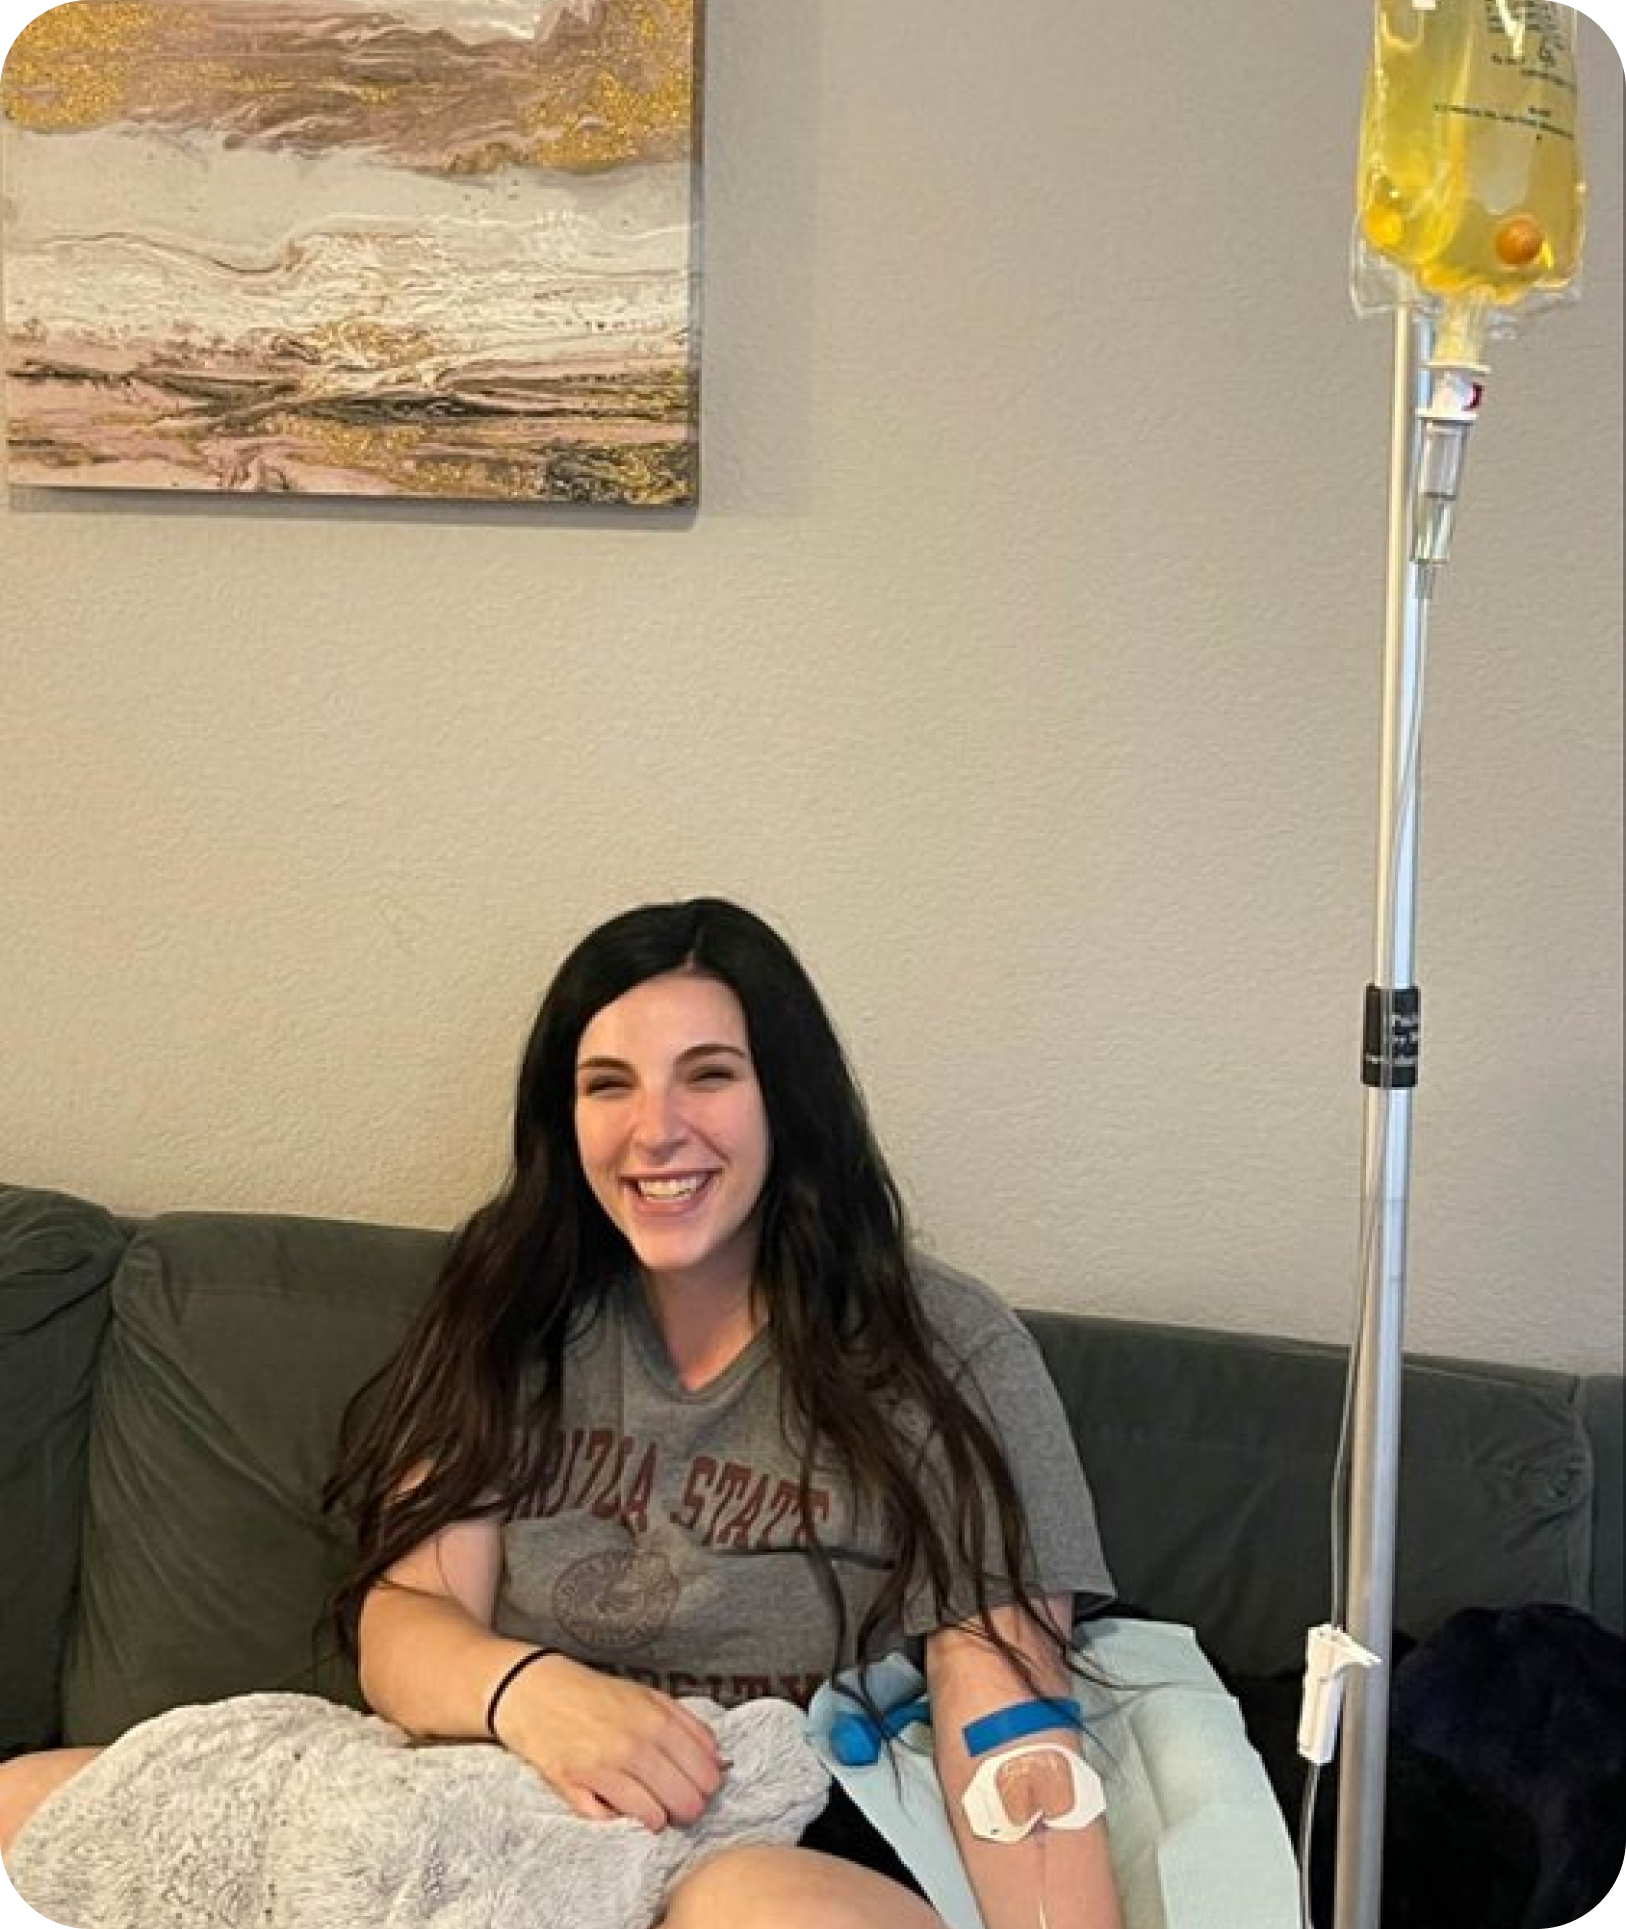 A woman is sitting on a couch with an iv in her arm.